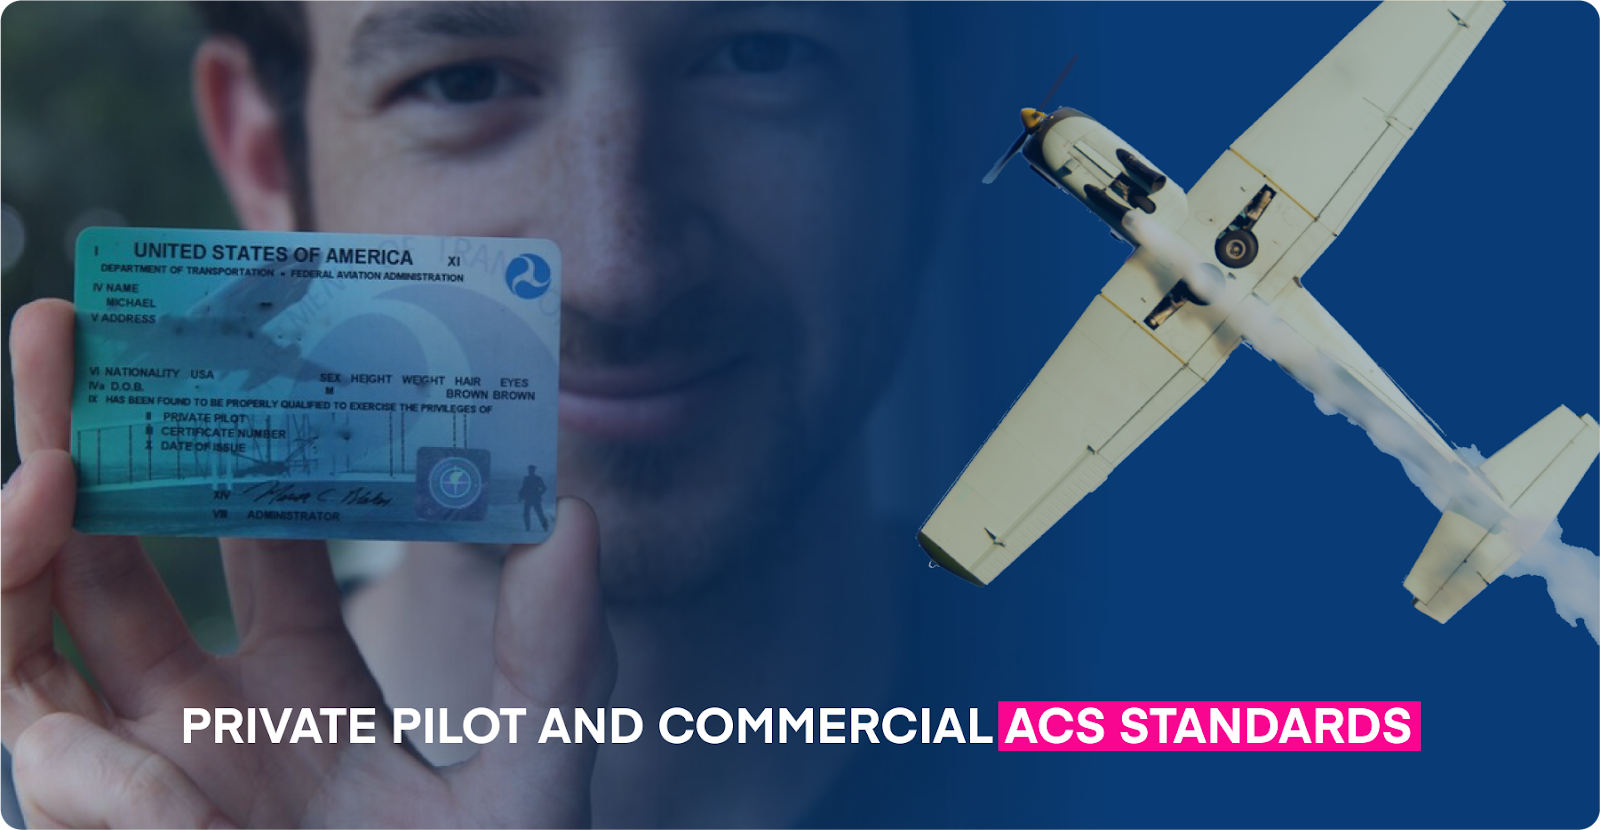 Private pilot and commercial pilot ACS standards.